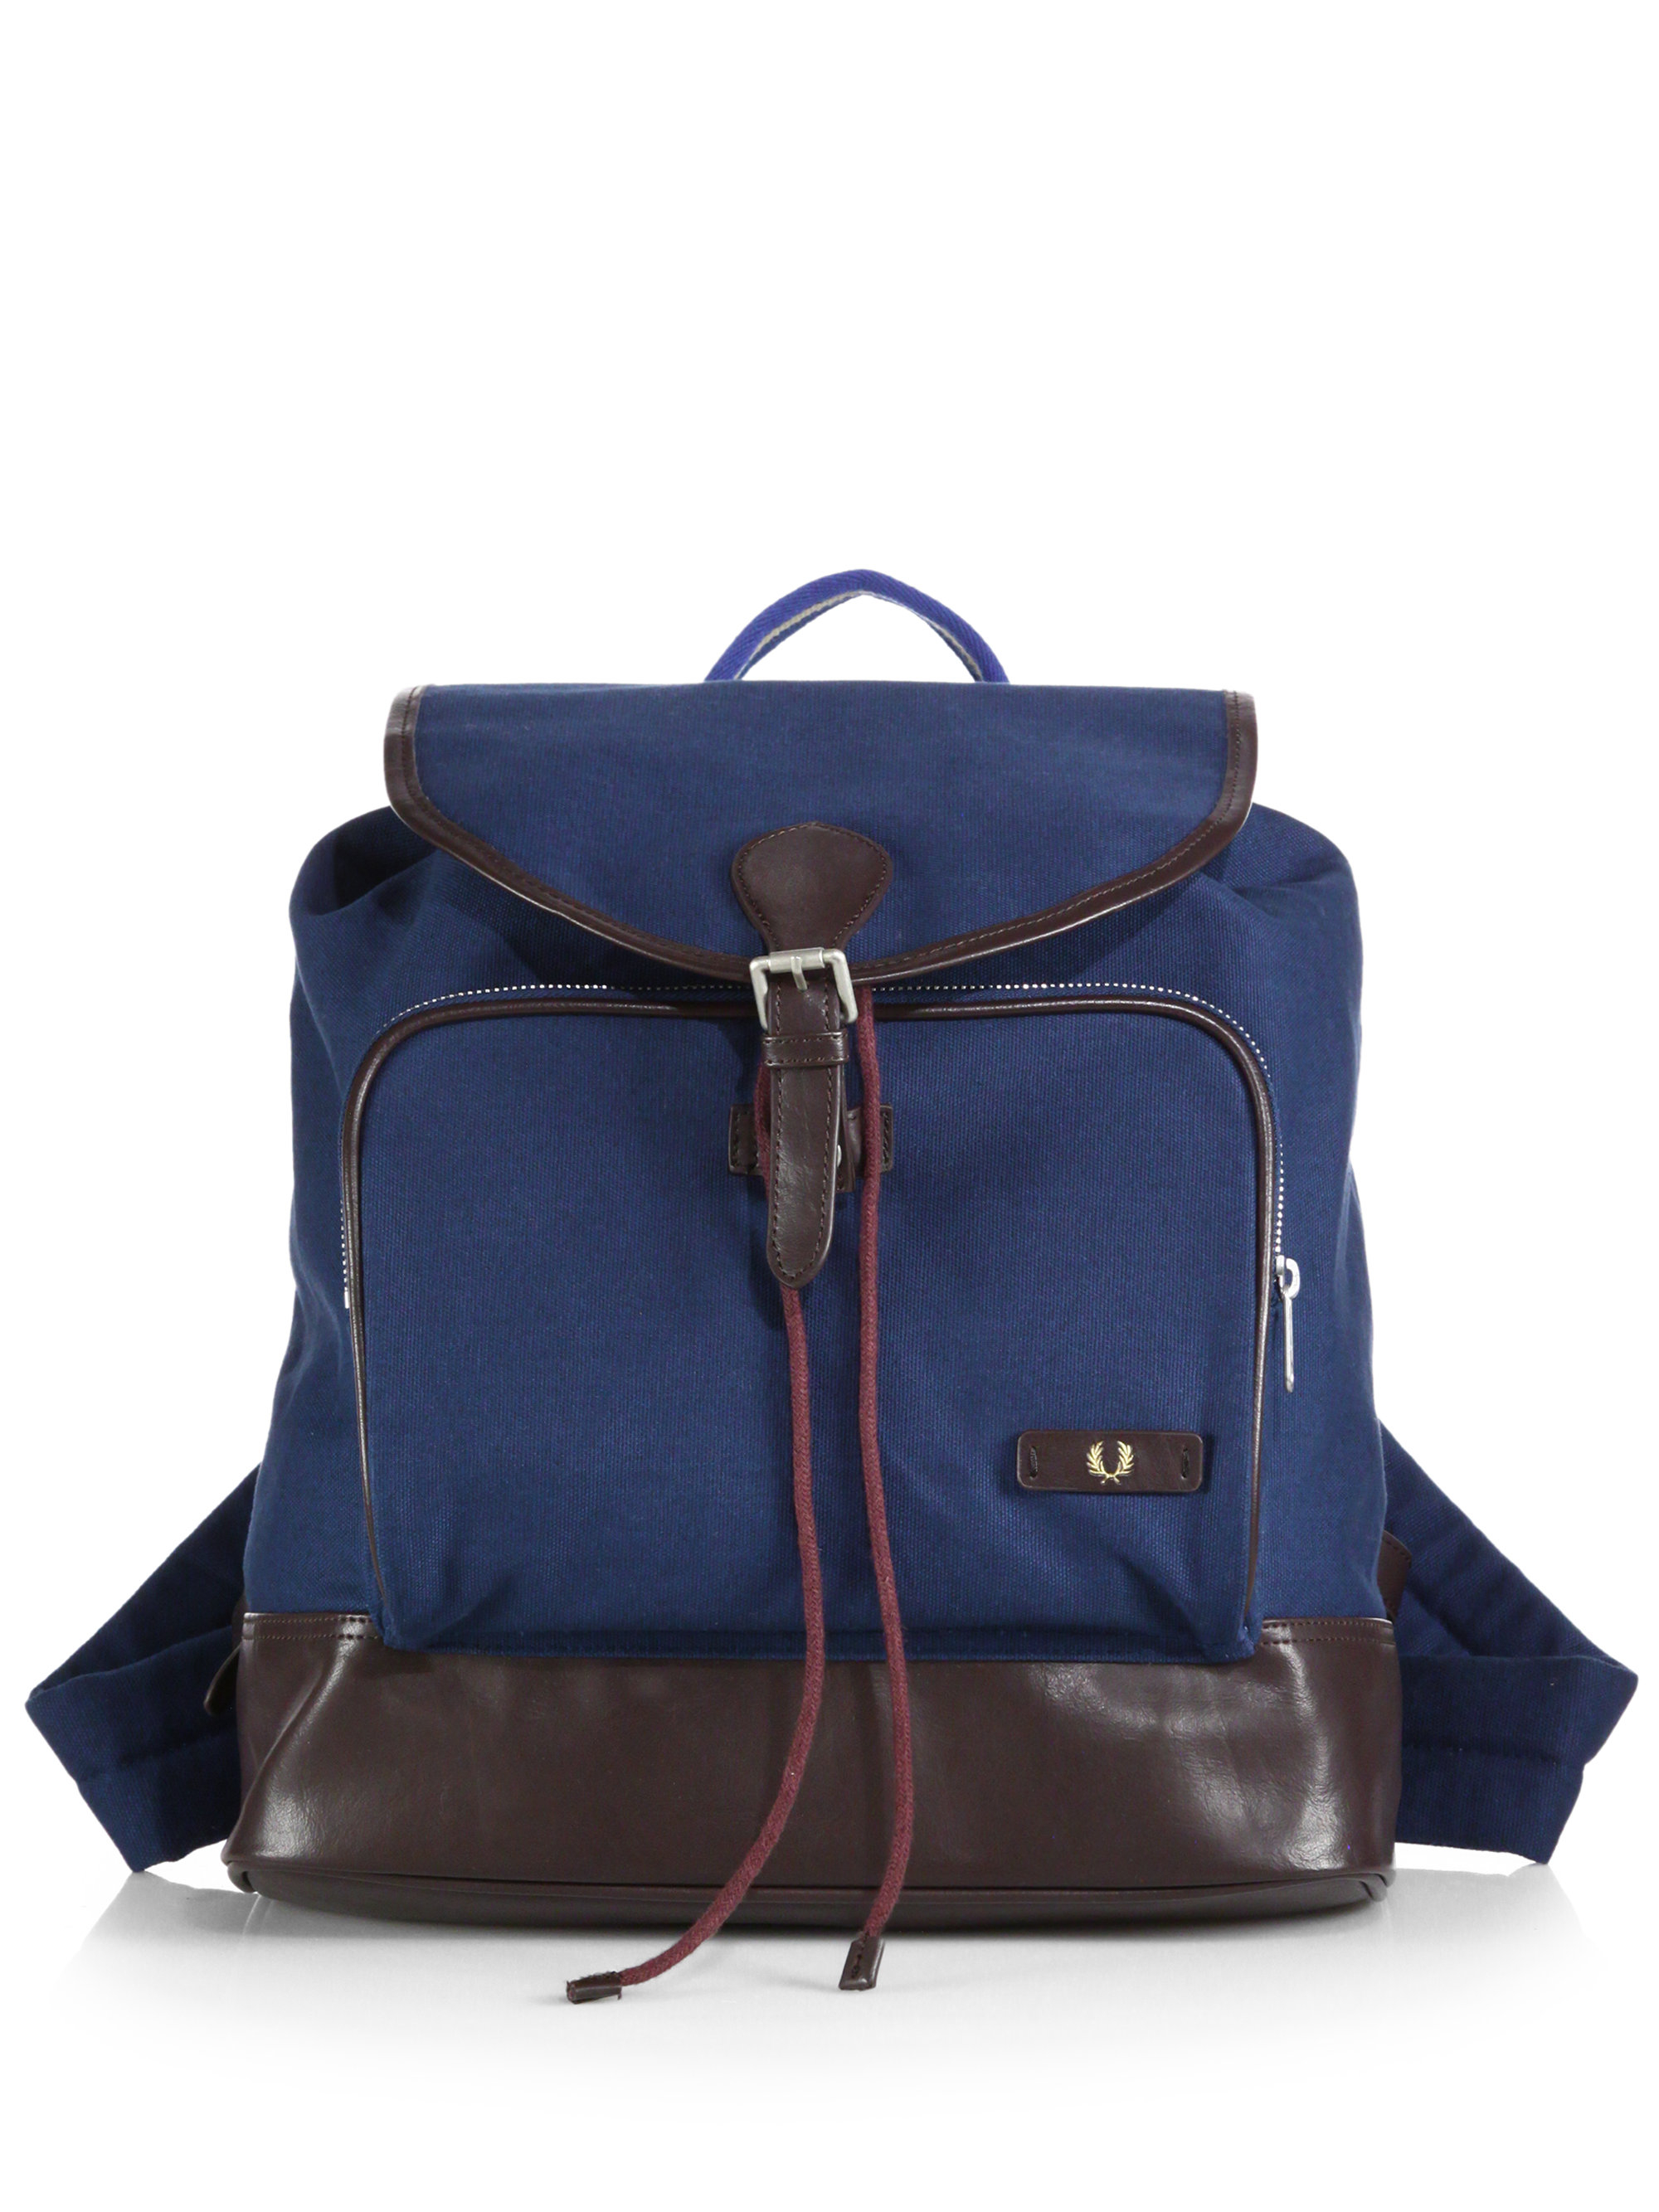 Fred Perry Classic Canvas Rucksack in Blue for Men - Lyst